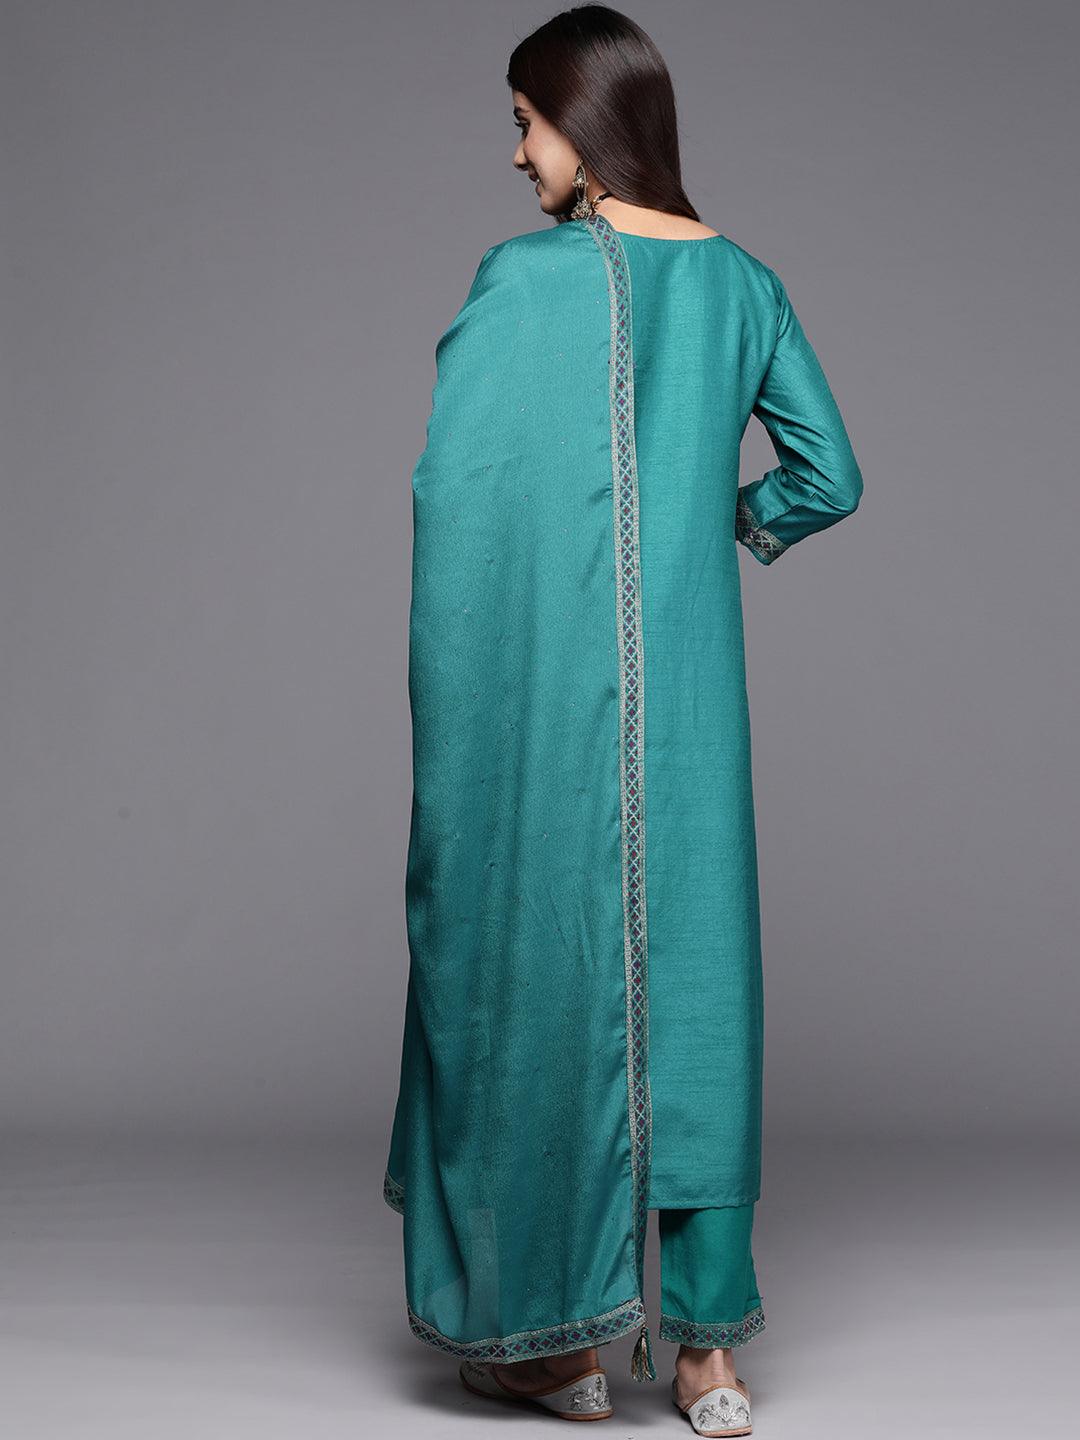 Turquoise Woven Design Silk Blend Straight Suit With Dupatta